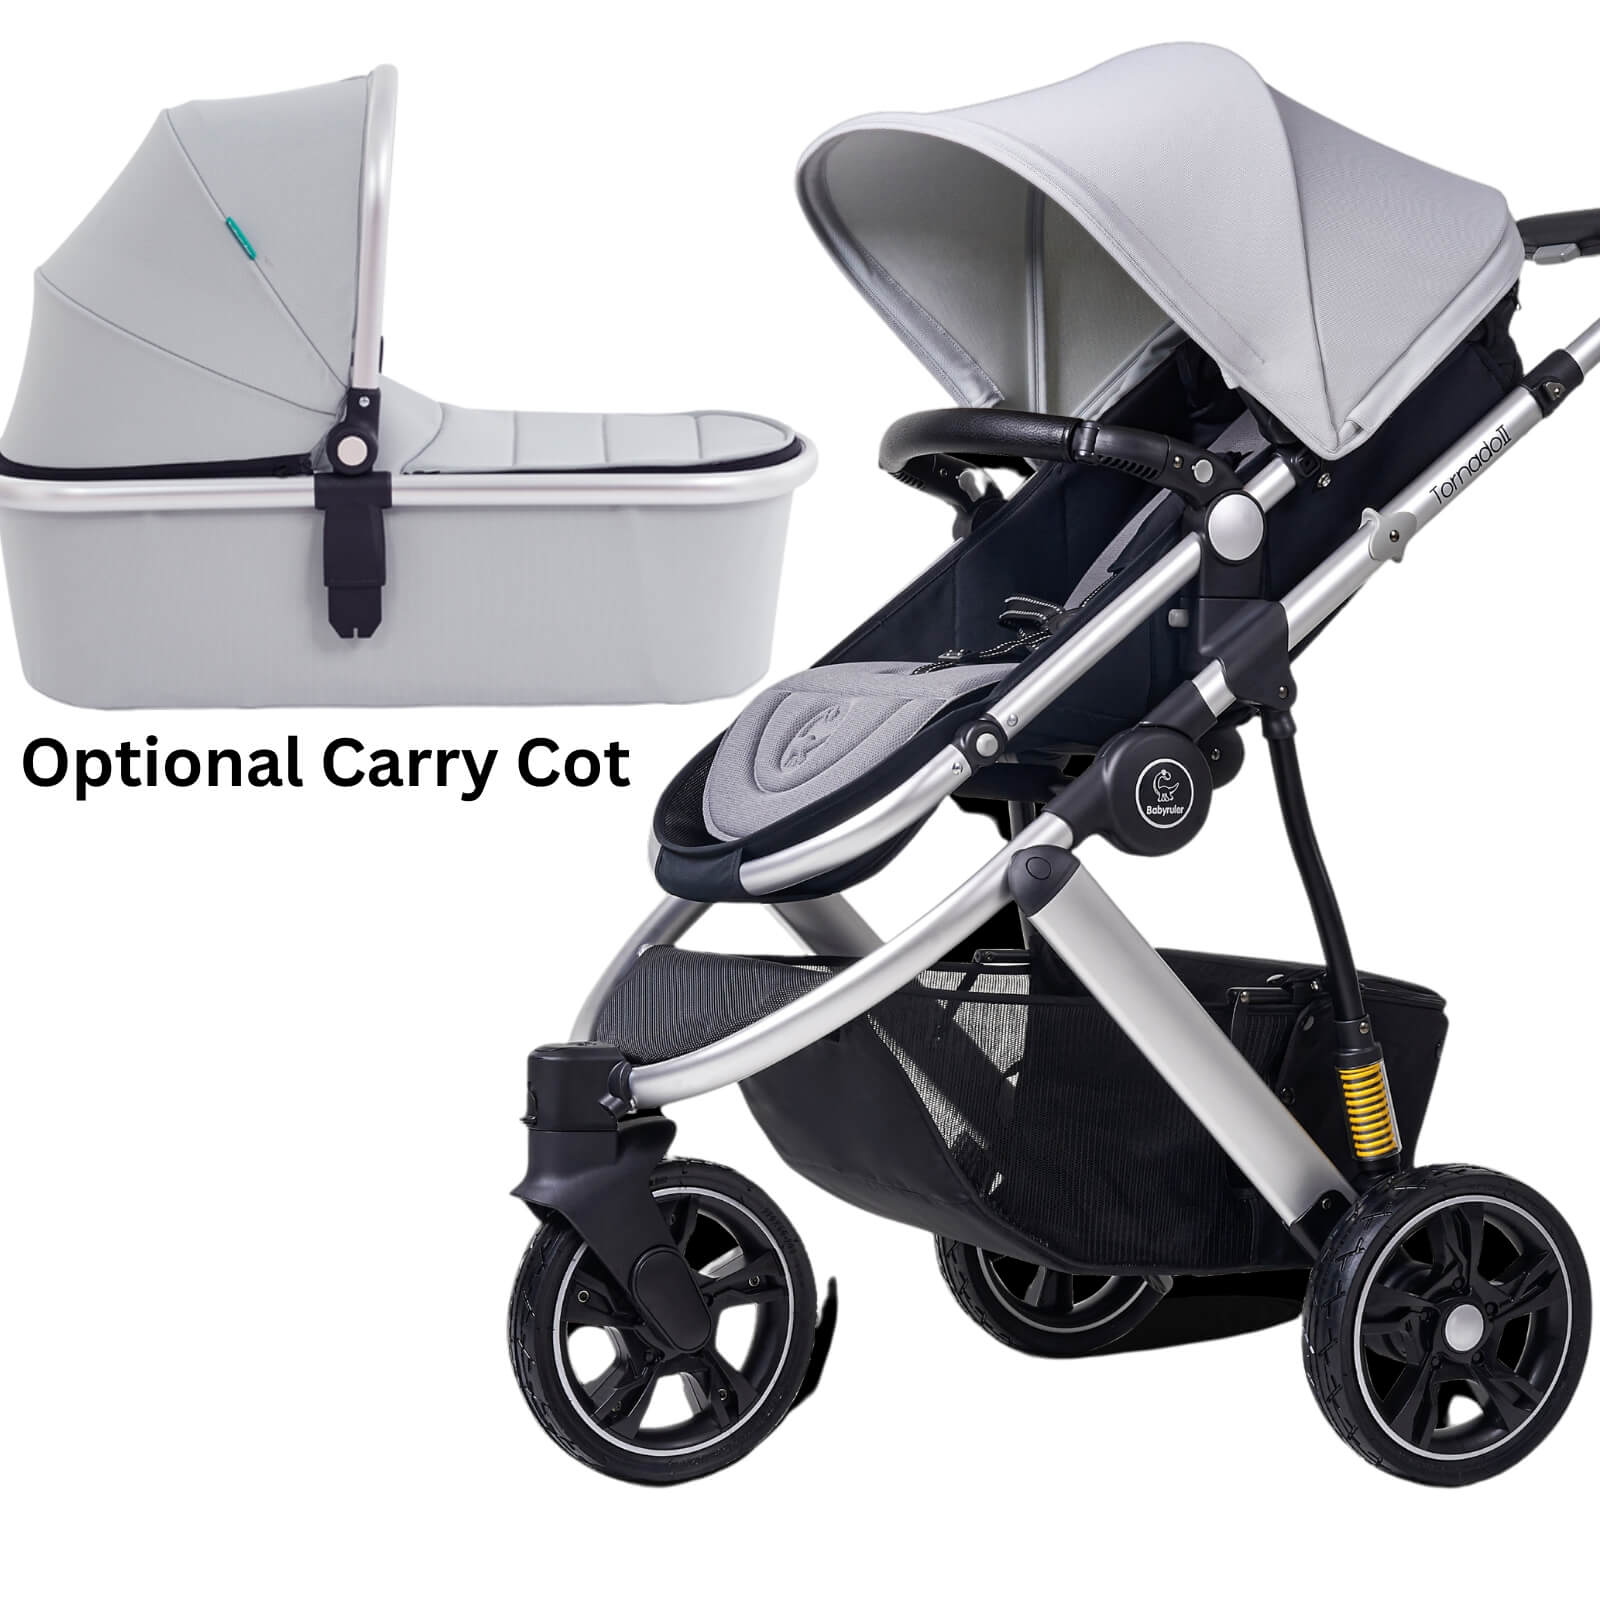 Three Wheels Baby Stroller Baby Prams-Premium Grey with carry cot